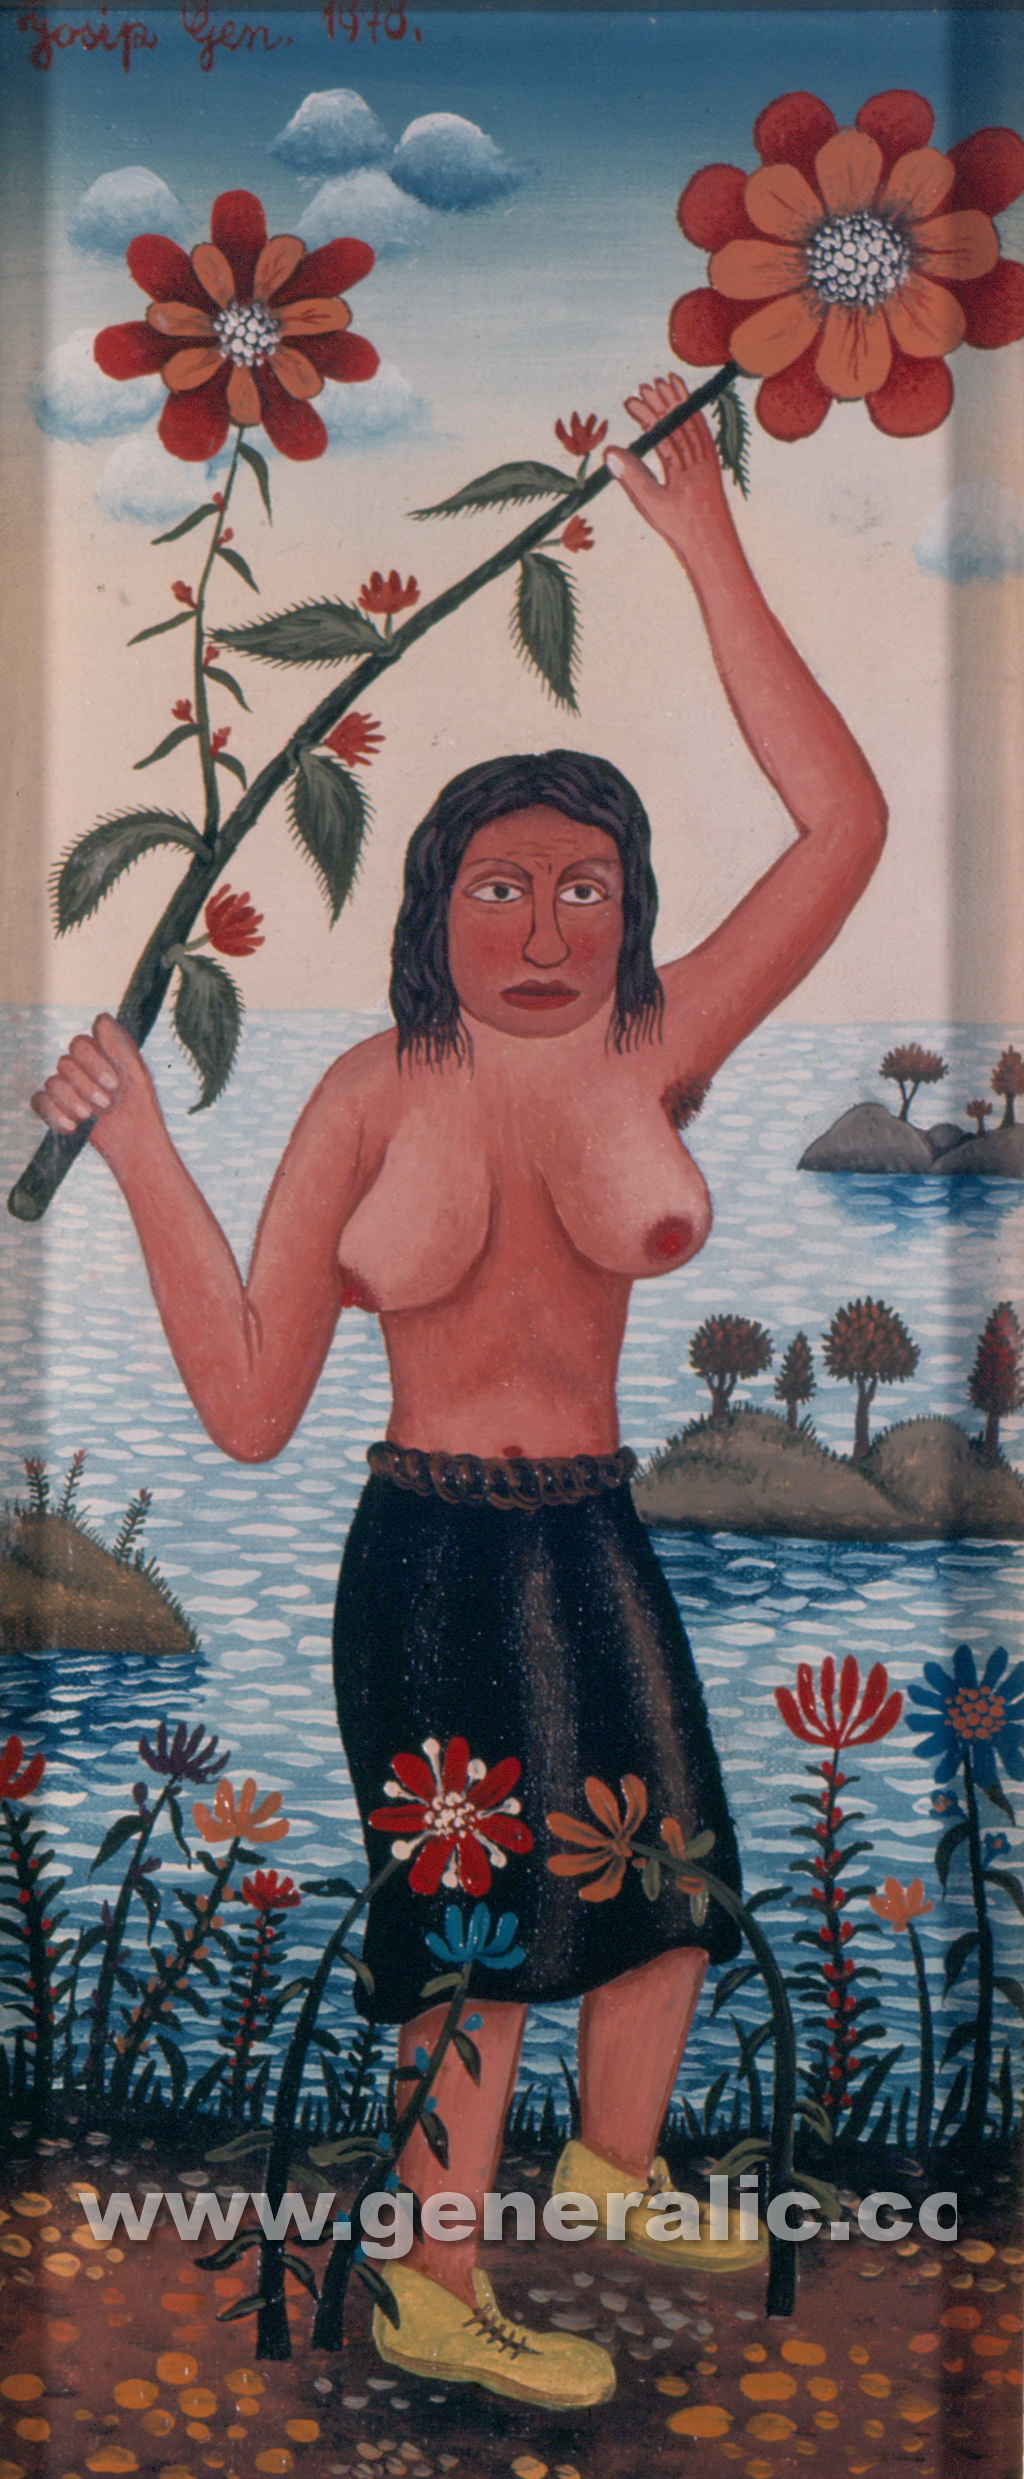 Josip Generalic, 1970, Topless woman with flowers, oil on canvas